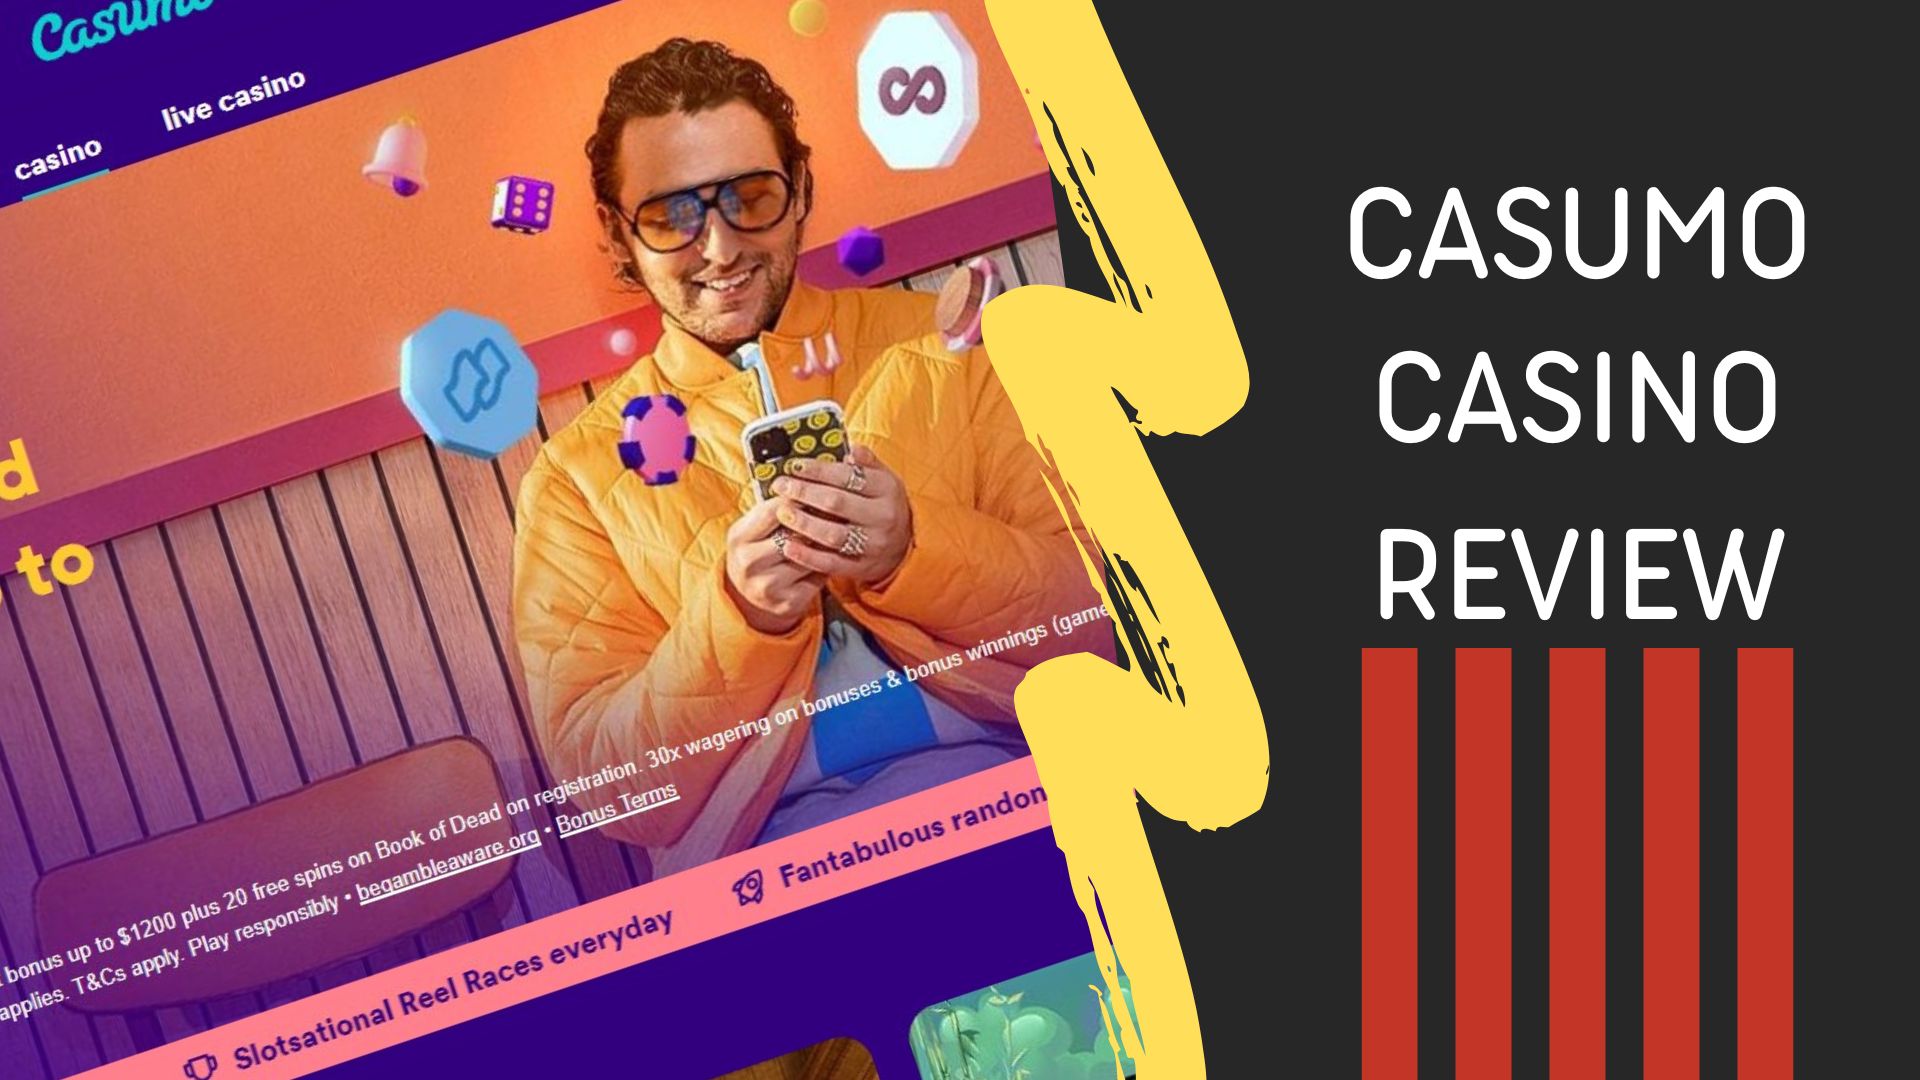 Play and gain with the Casumo casino online!